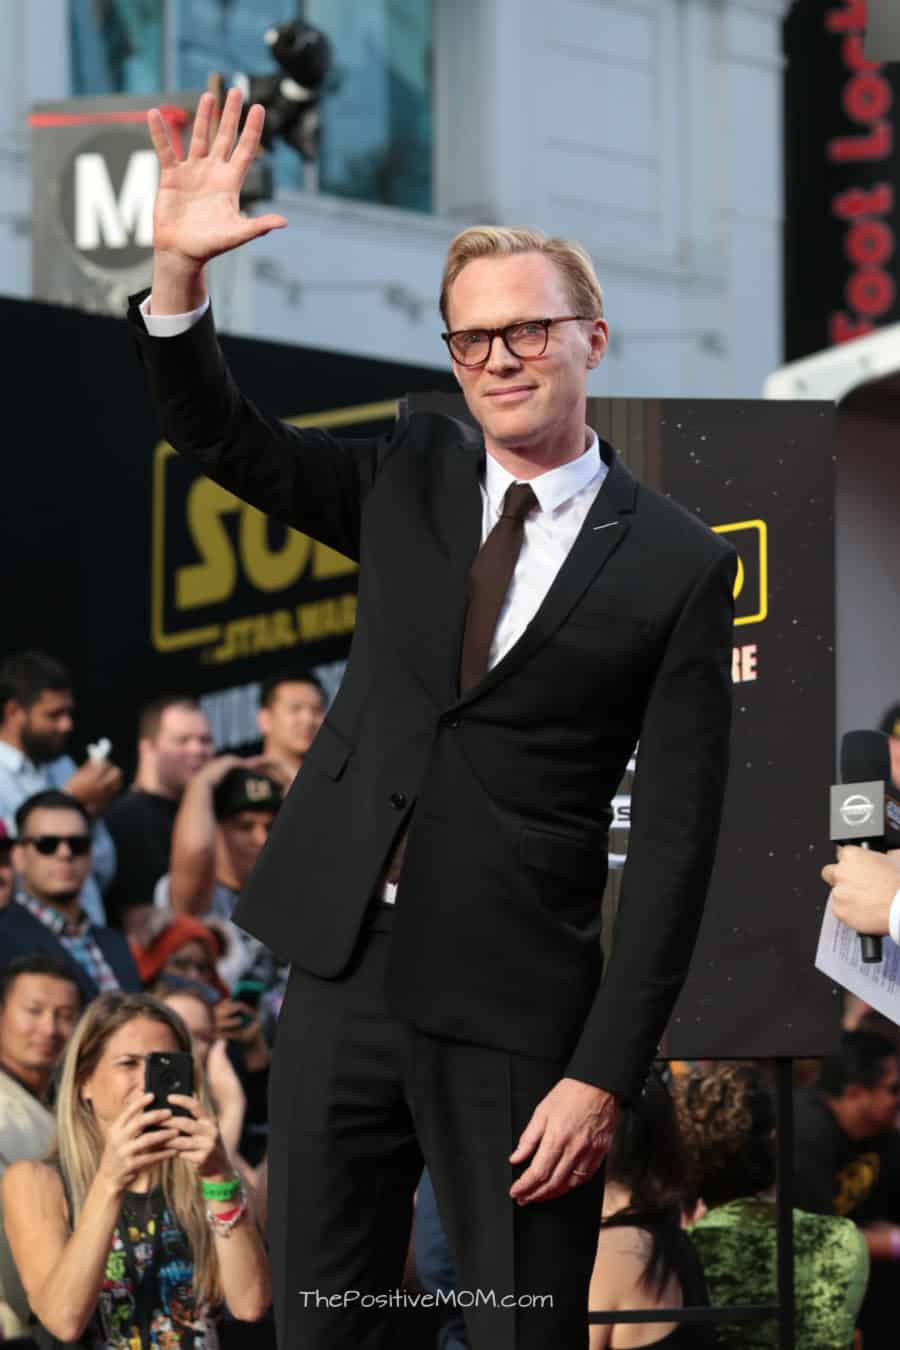 Paul Bettany attends the world premiere of ÒSolo: A Star Wars StoryÓ in Hollywood on May 10, 2018..(Photo: Alex J. Berliner/ABImages).